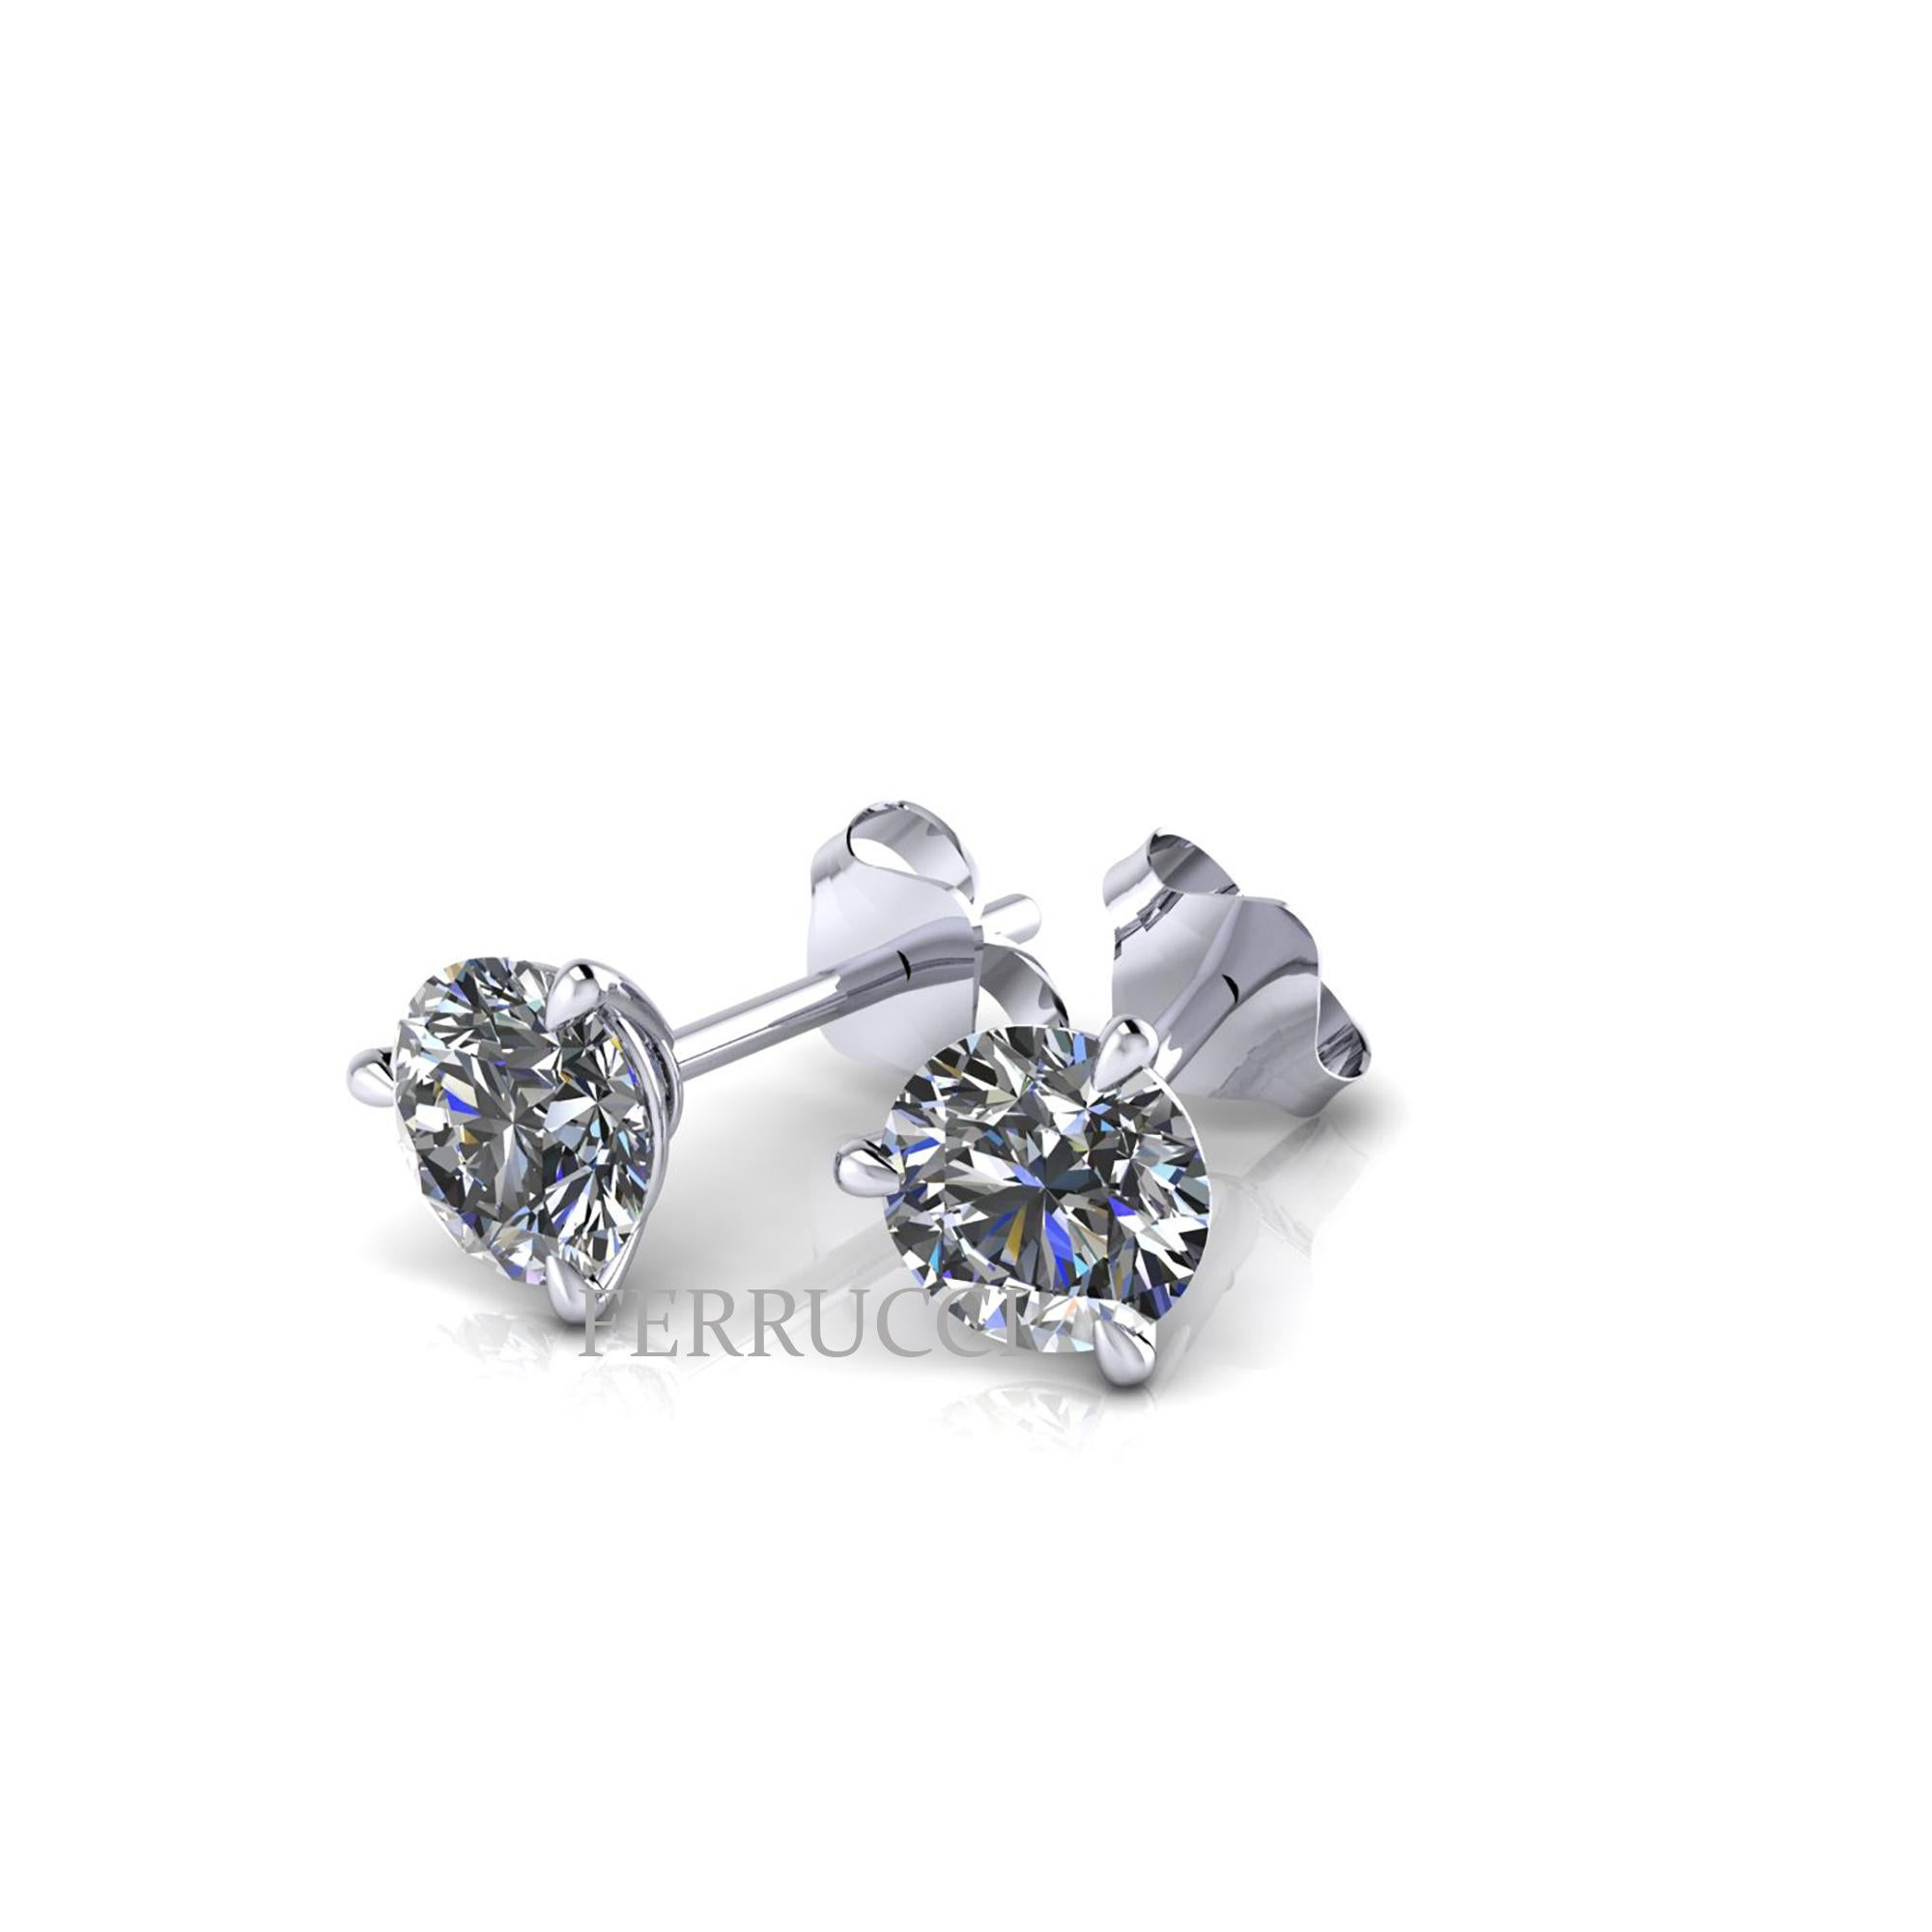 FERRUCCI GIA Certified 1 Carat total, Round Diamonds Martini Studs made in Platinum in New York by Italian master jeweler, Low setting style, pret-a-porter, easy to wear, ideal for every woman from office to evening out, everlasting look, perfect